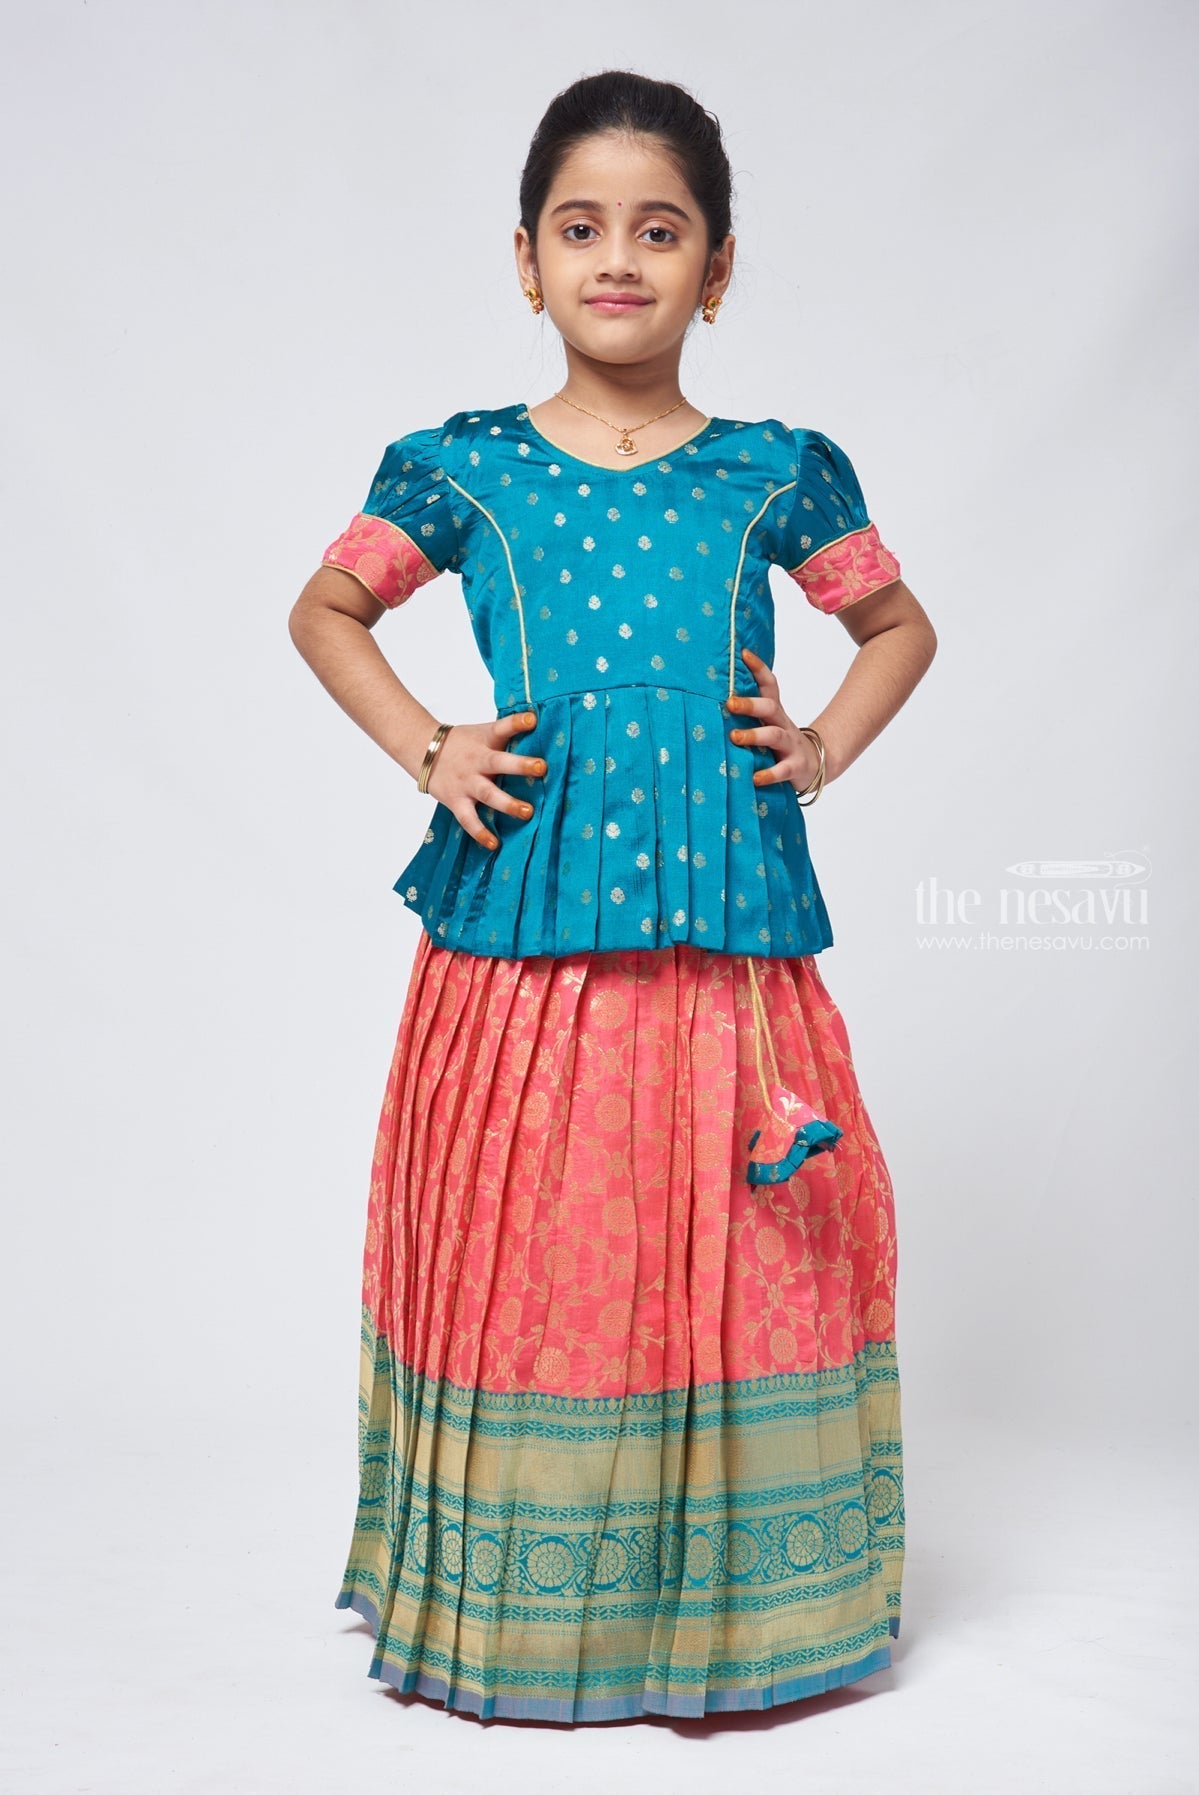 These Pattu Pavadai Choices Are Perfect For Your Tiny Tots This Wedding  Season | Kids designer dresses, Dresses kids girl, Kids fashion dress